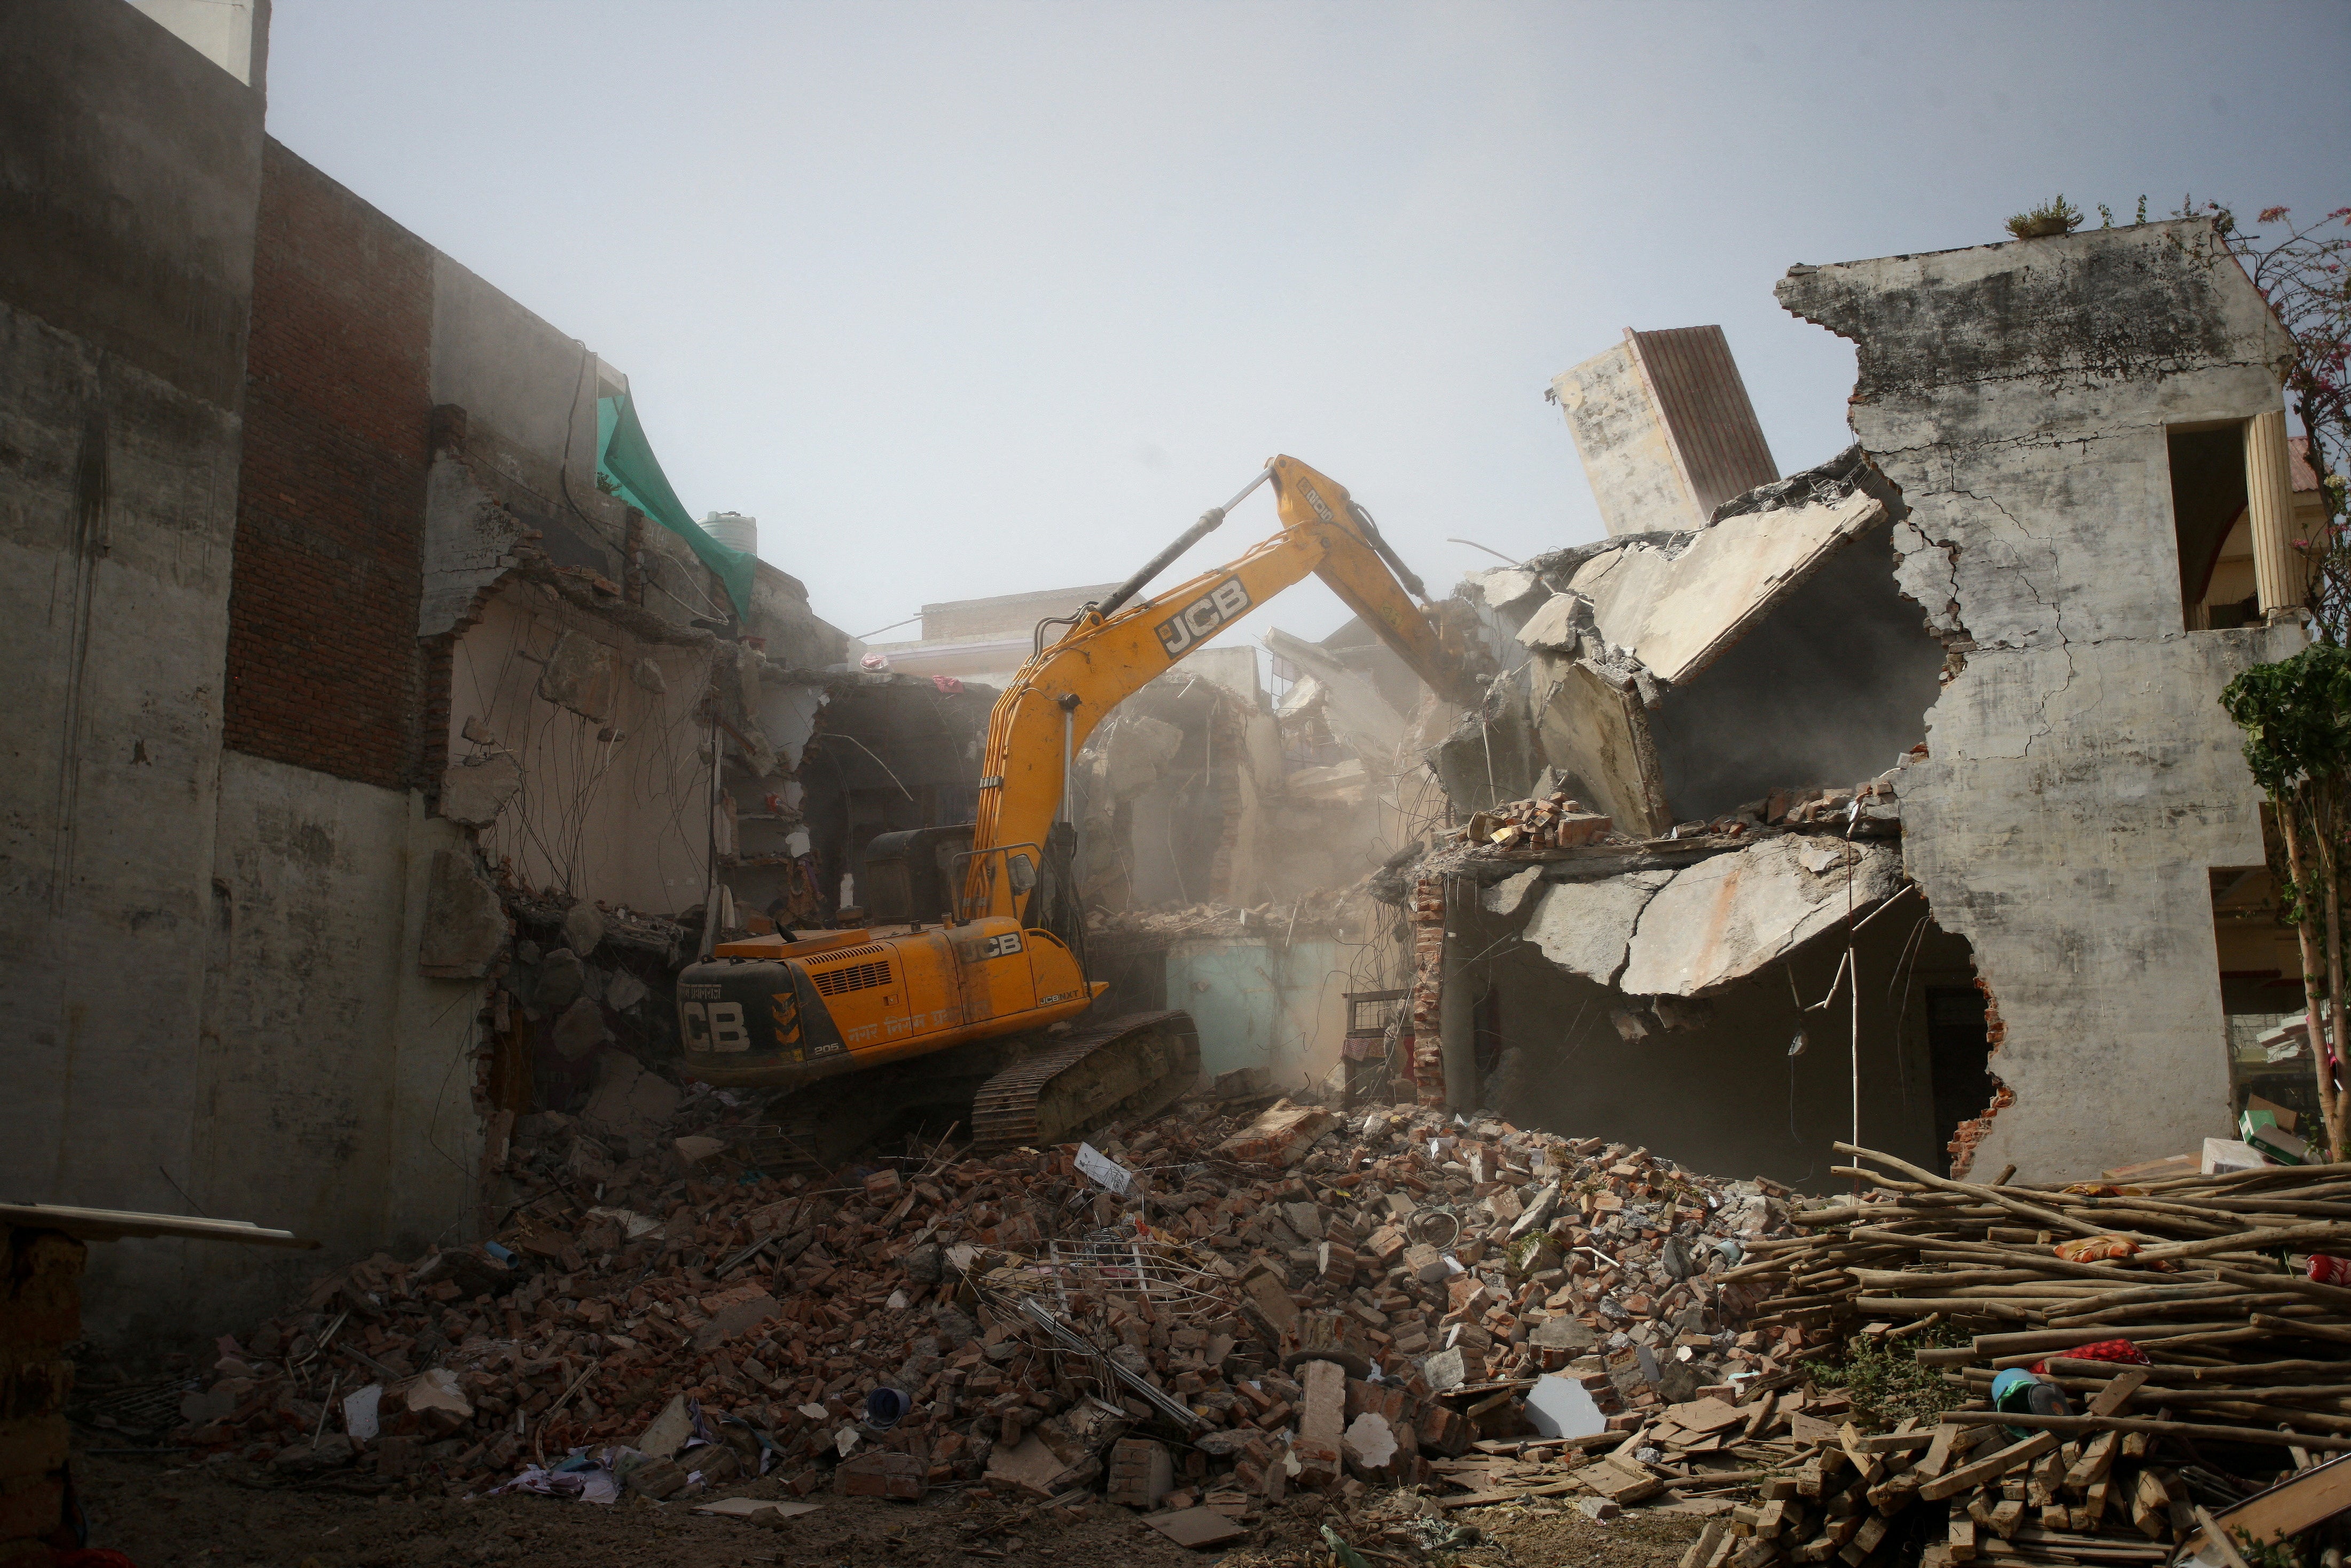 A bulldozer demolishes the house of a Muslim man on 12 June